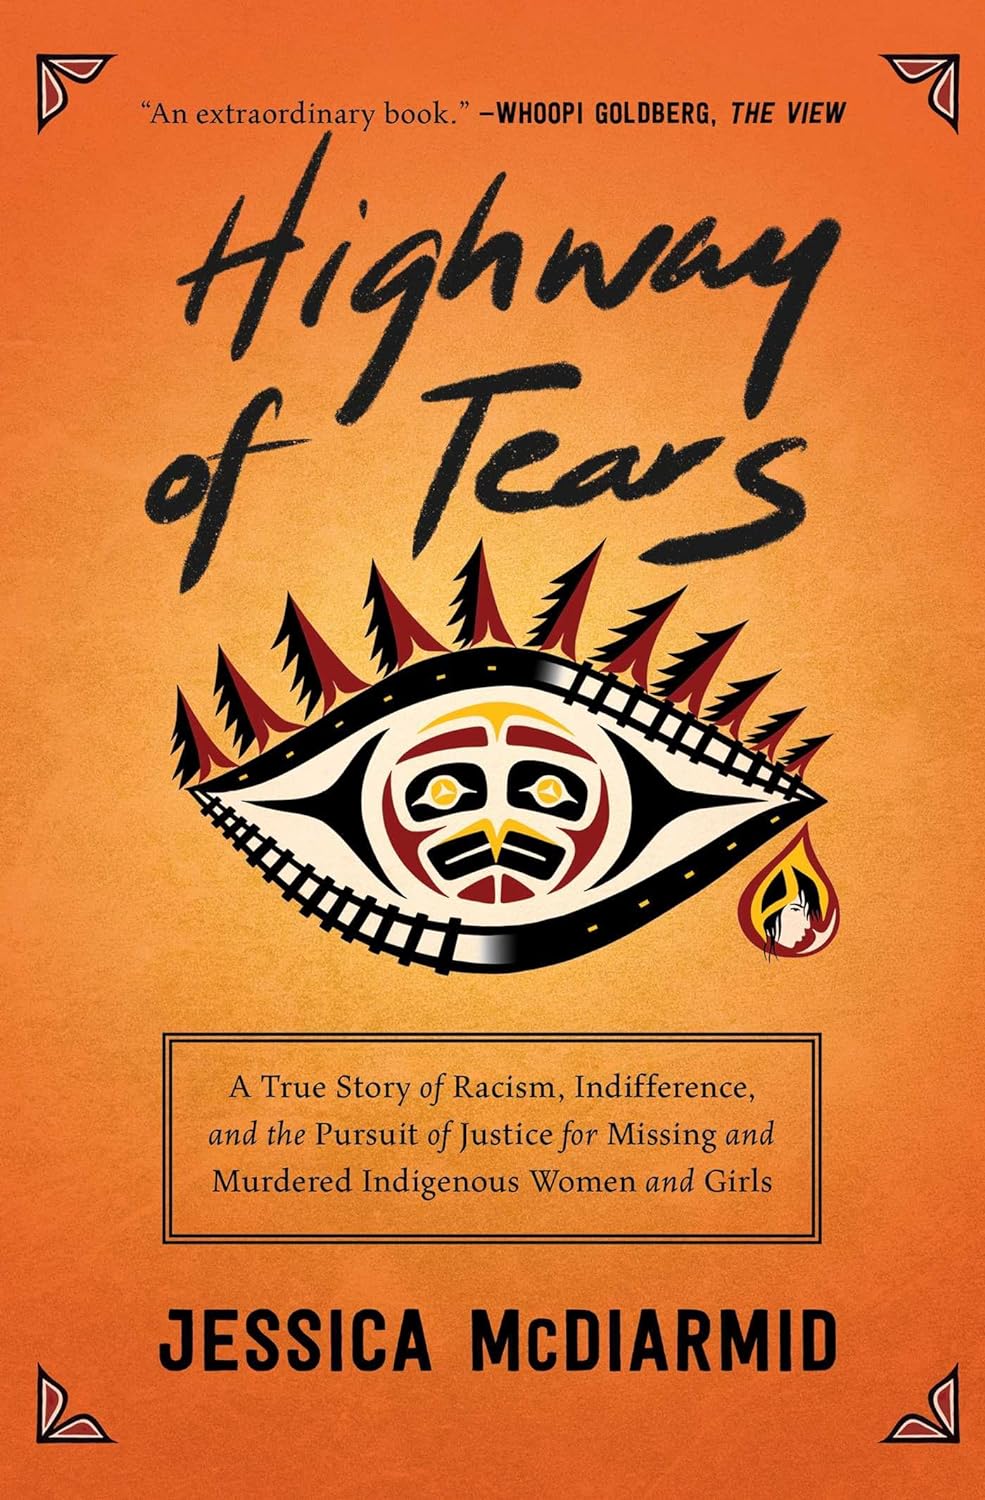 Highway of Tears: A True Story of Racism, Indifference, and the Pursuit of Justice for Missing and Murdered Indigenous Women and Girls by Jessica McDiarmid